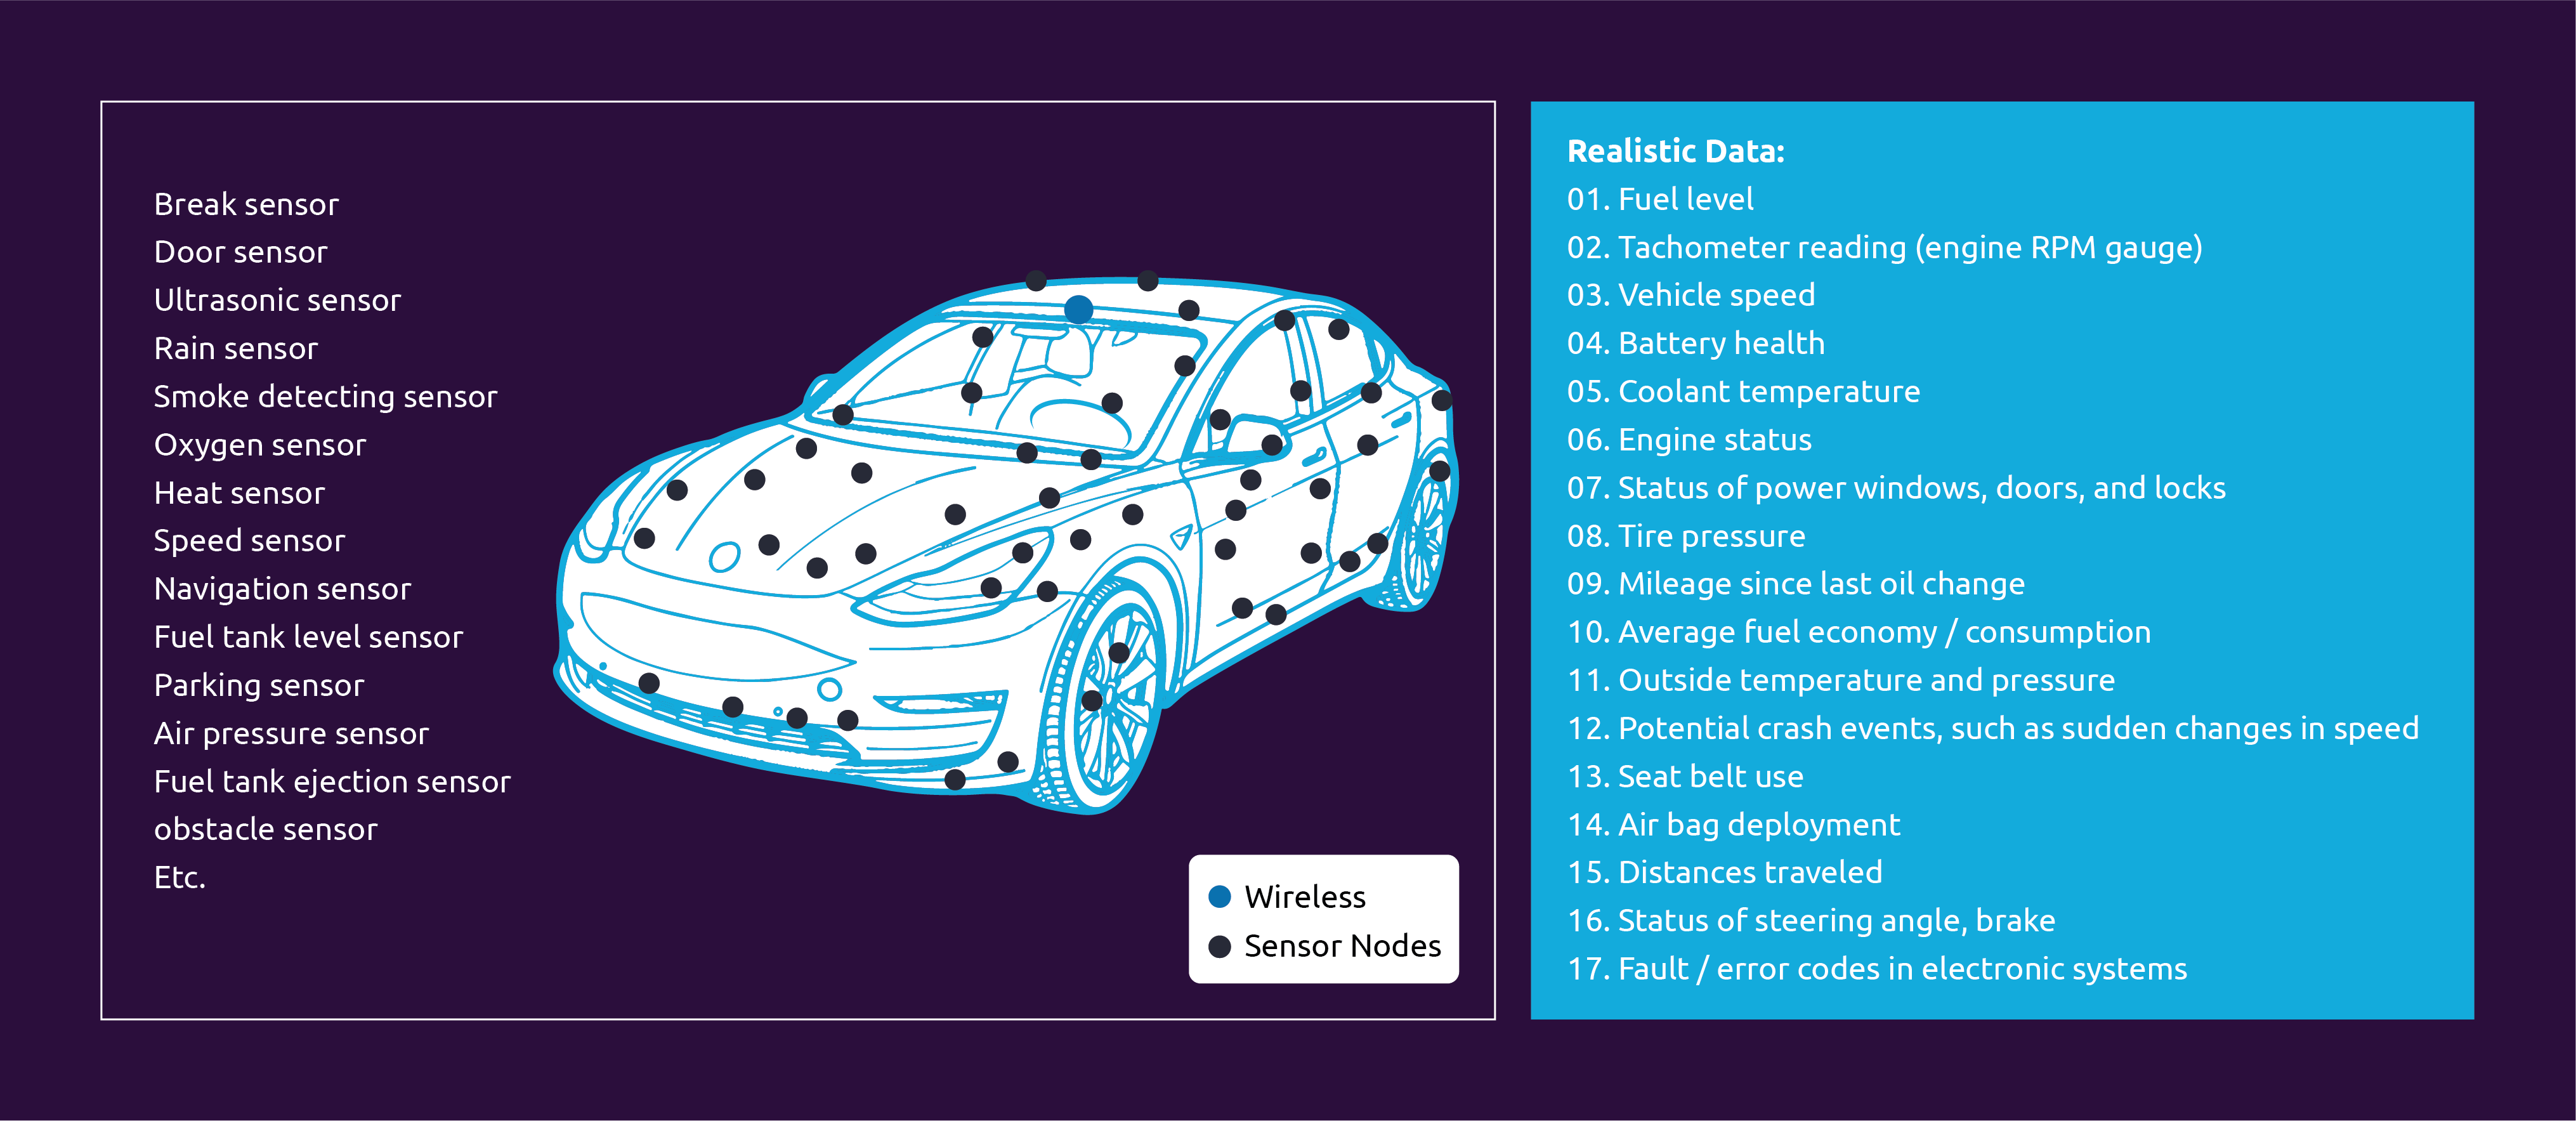 Telematics data captured from the car network